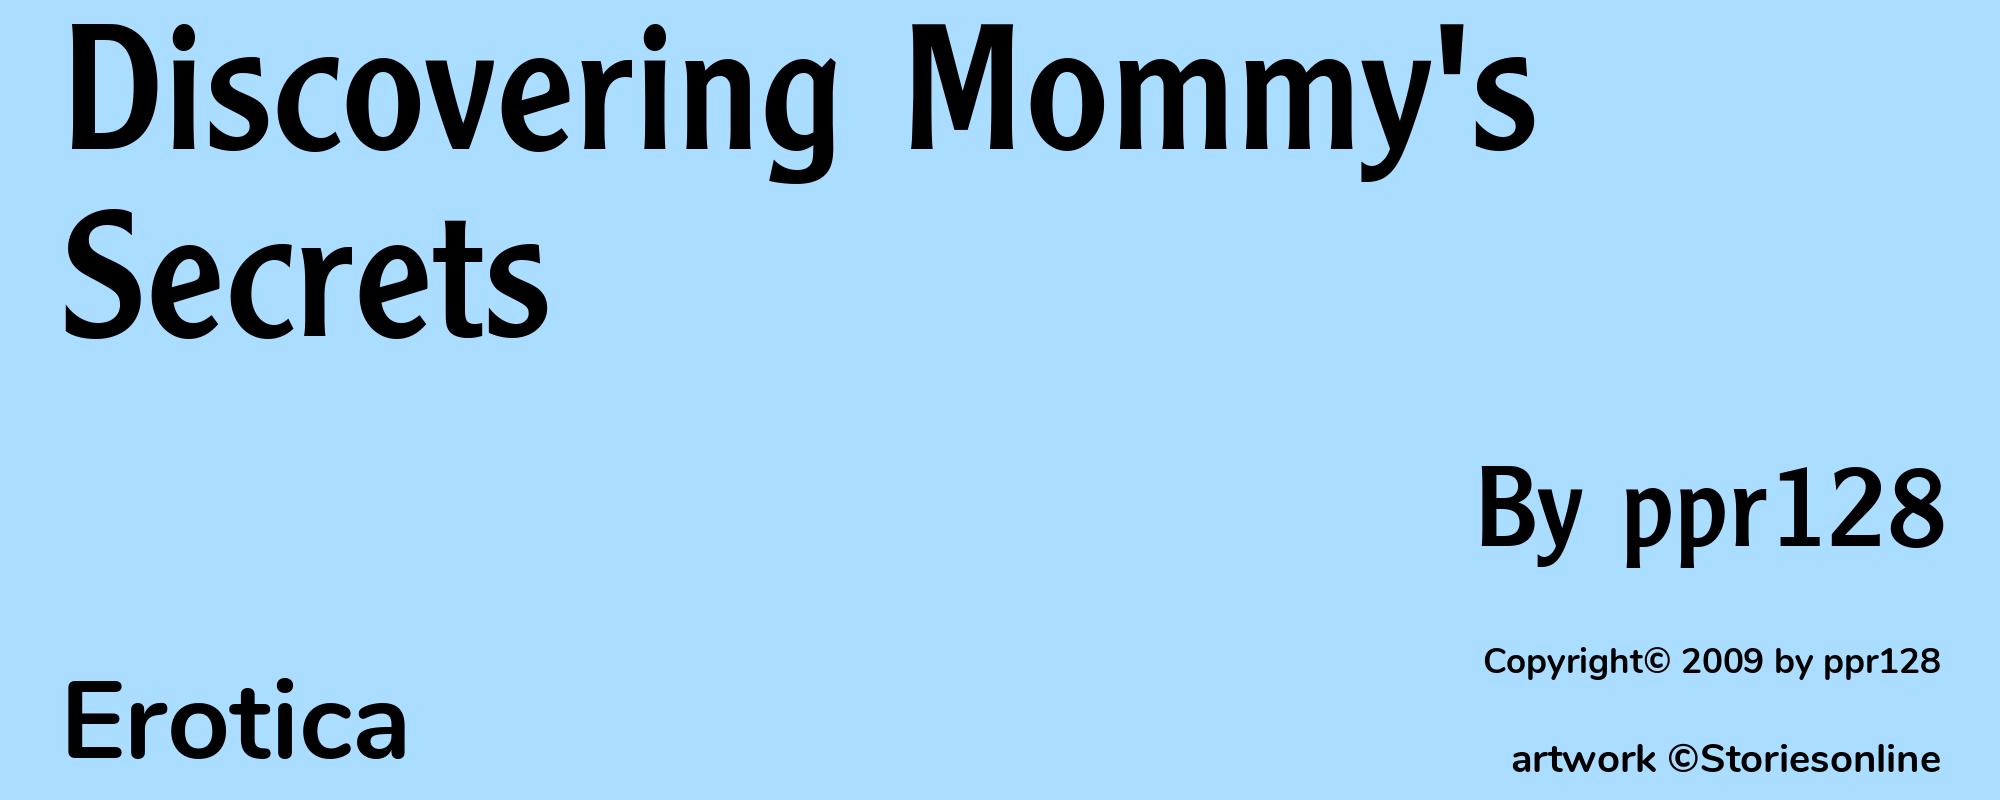 Discovering Mommy's Secrets - Cover